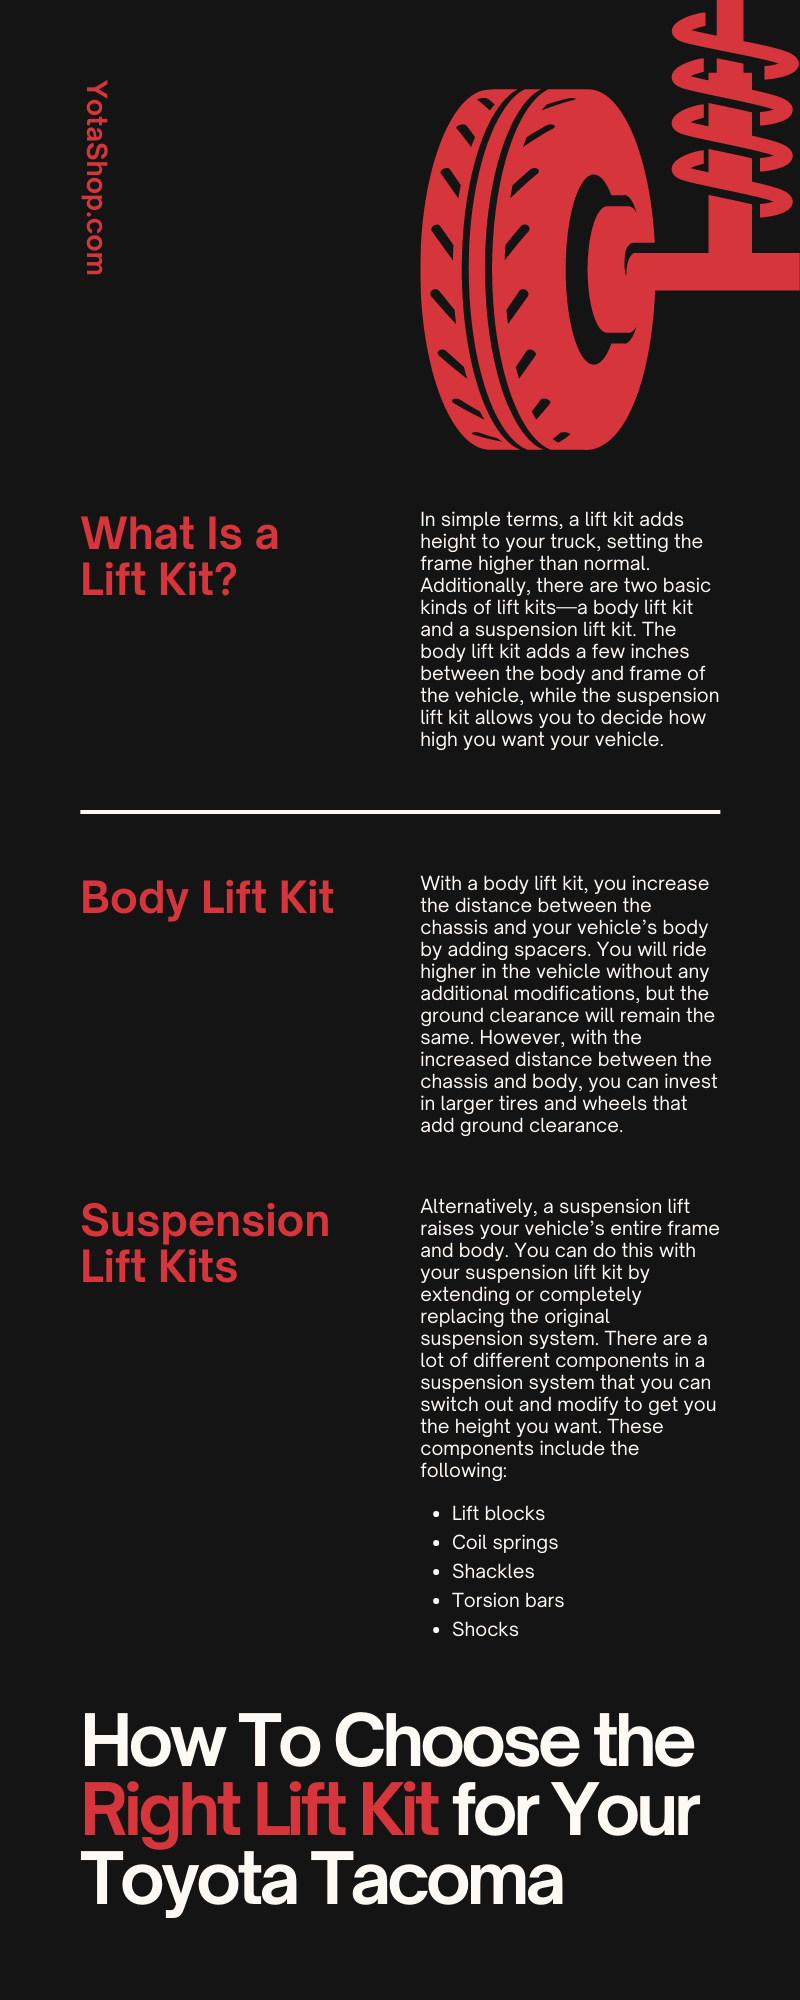 How To Choose the Right Lift Kit for Your Toyota Tacoma